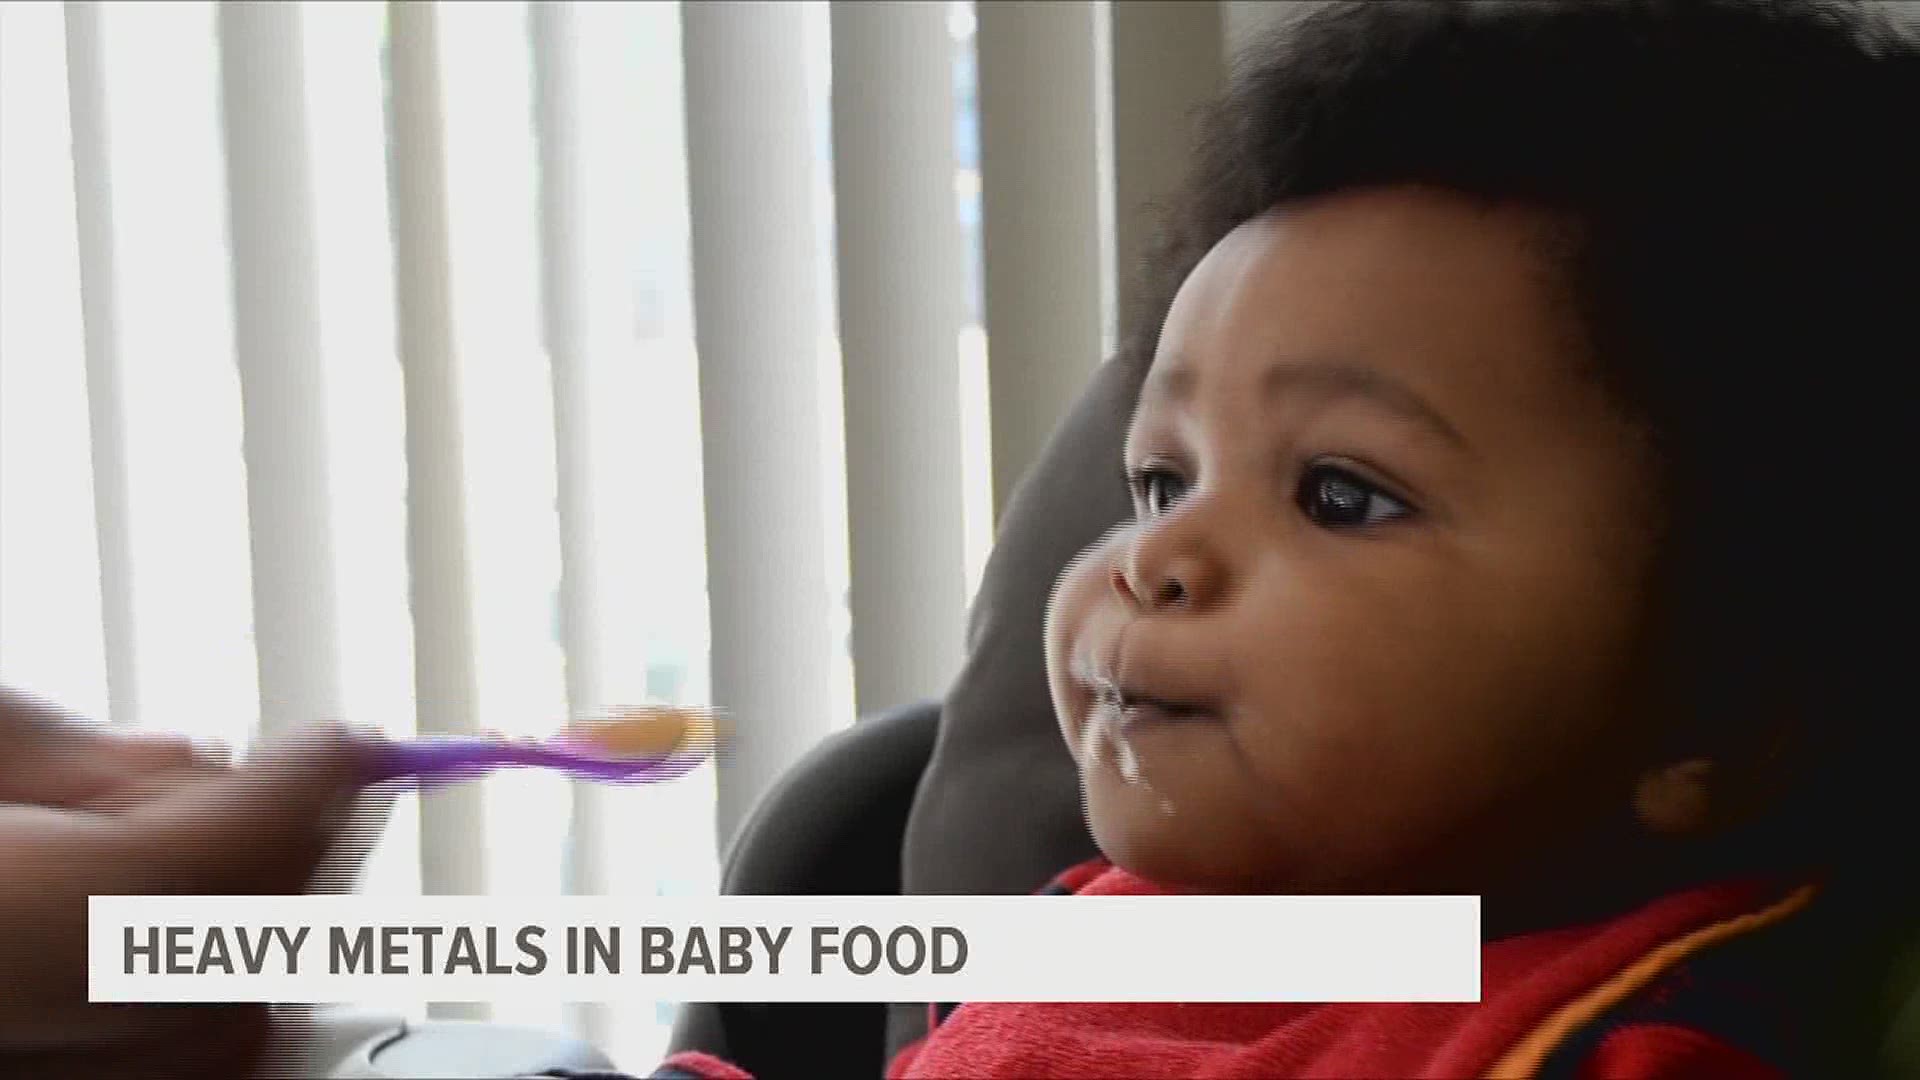 Dr. Sean Campbell of Wellspan Pediatric Medicine spoke with FOX43's Amy Lutz about recent findings that indicate popular baby foods contain heavy metals.